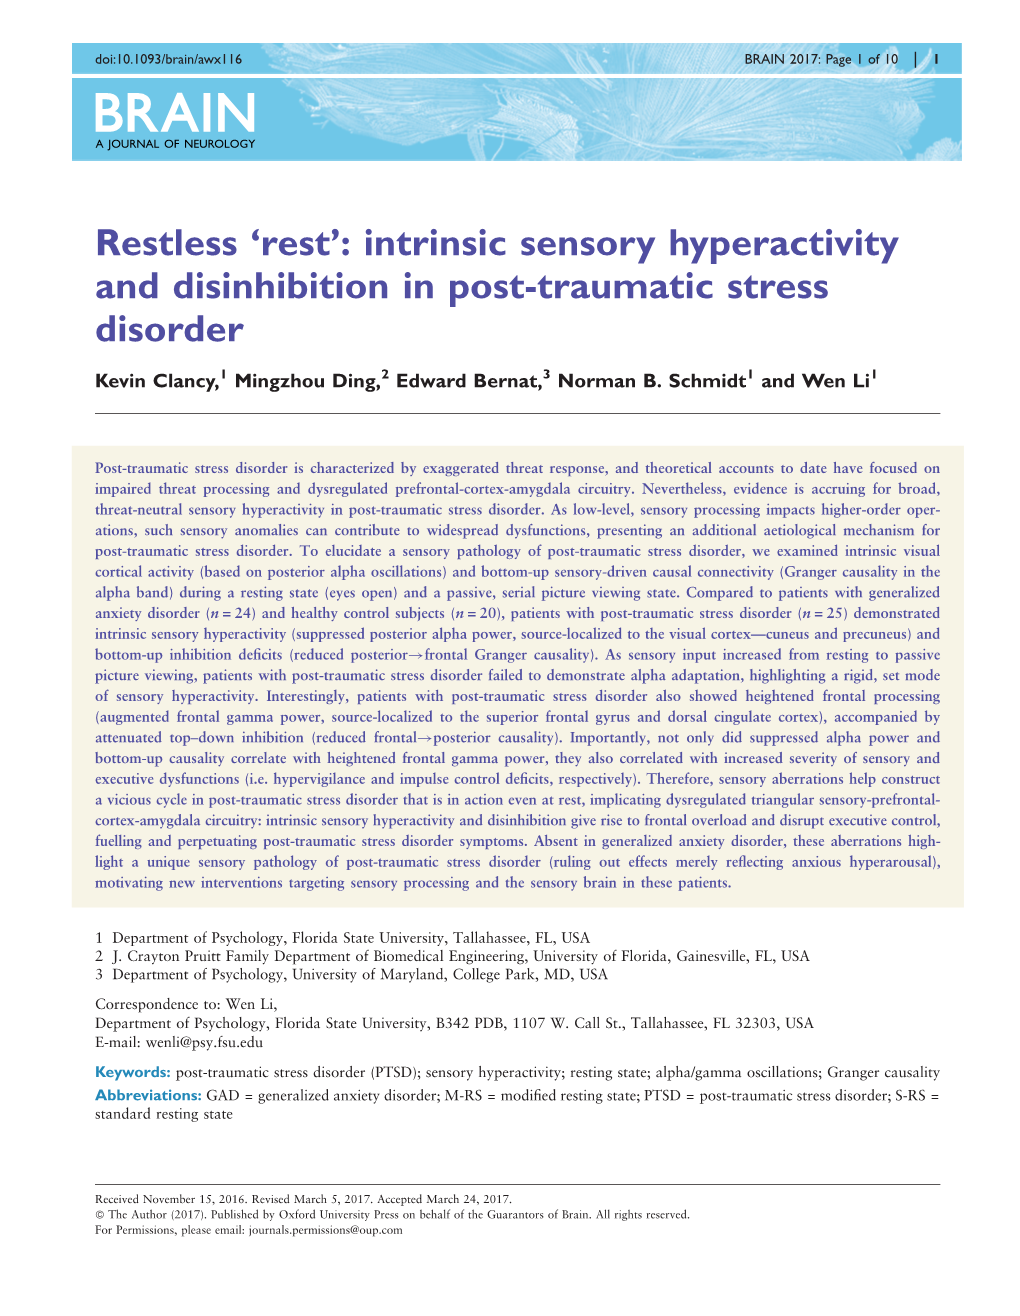 Restless 'Rest': Intrinsic Sensory Hyperactivity and Disinhibition in Post-Traumatic Stress Disorder